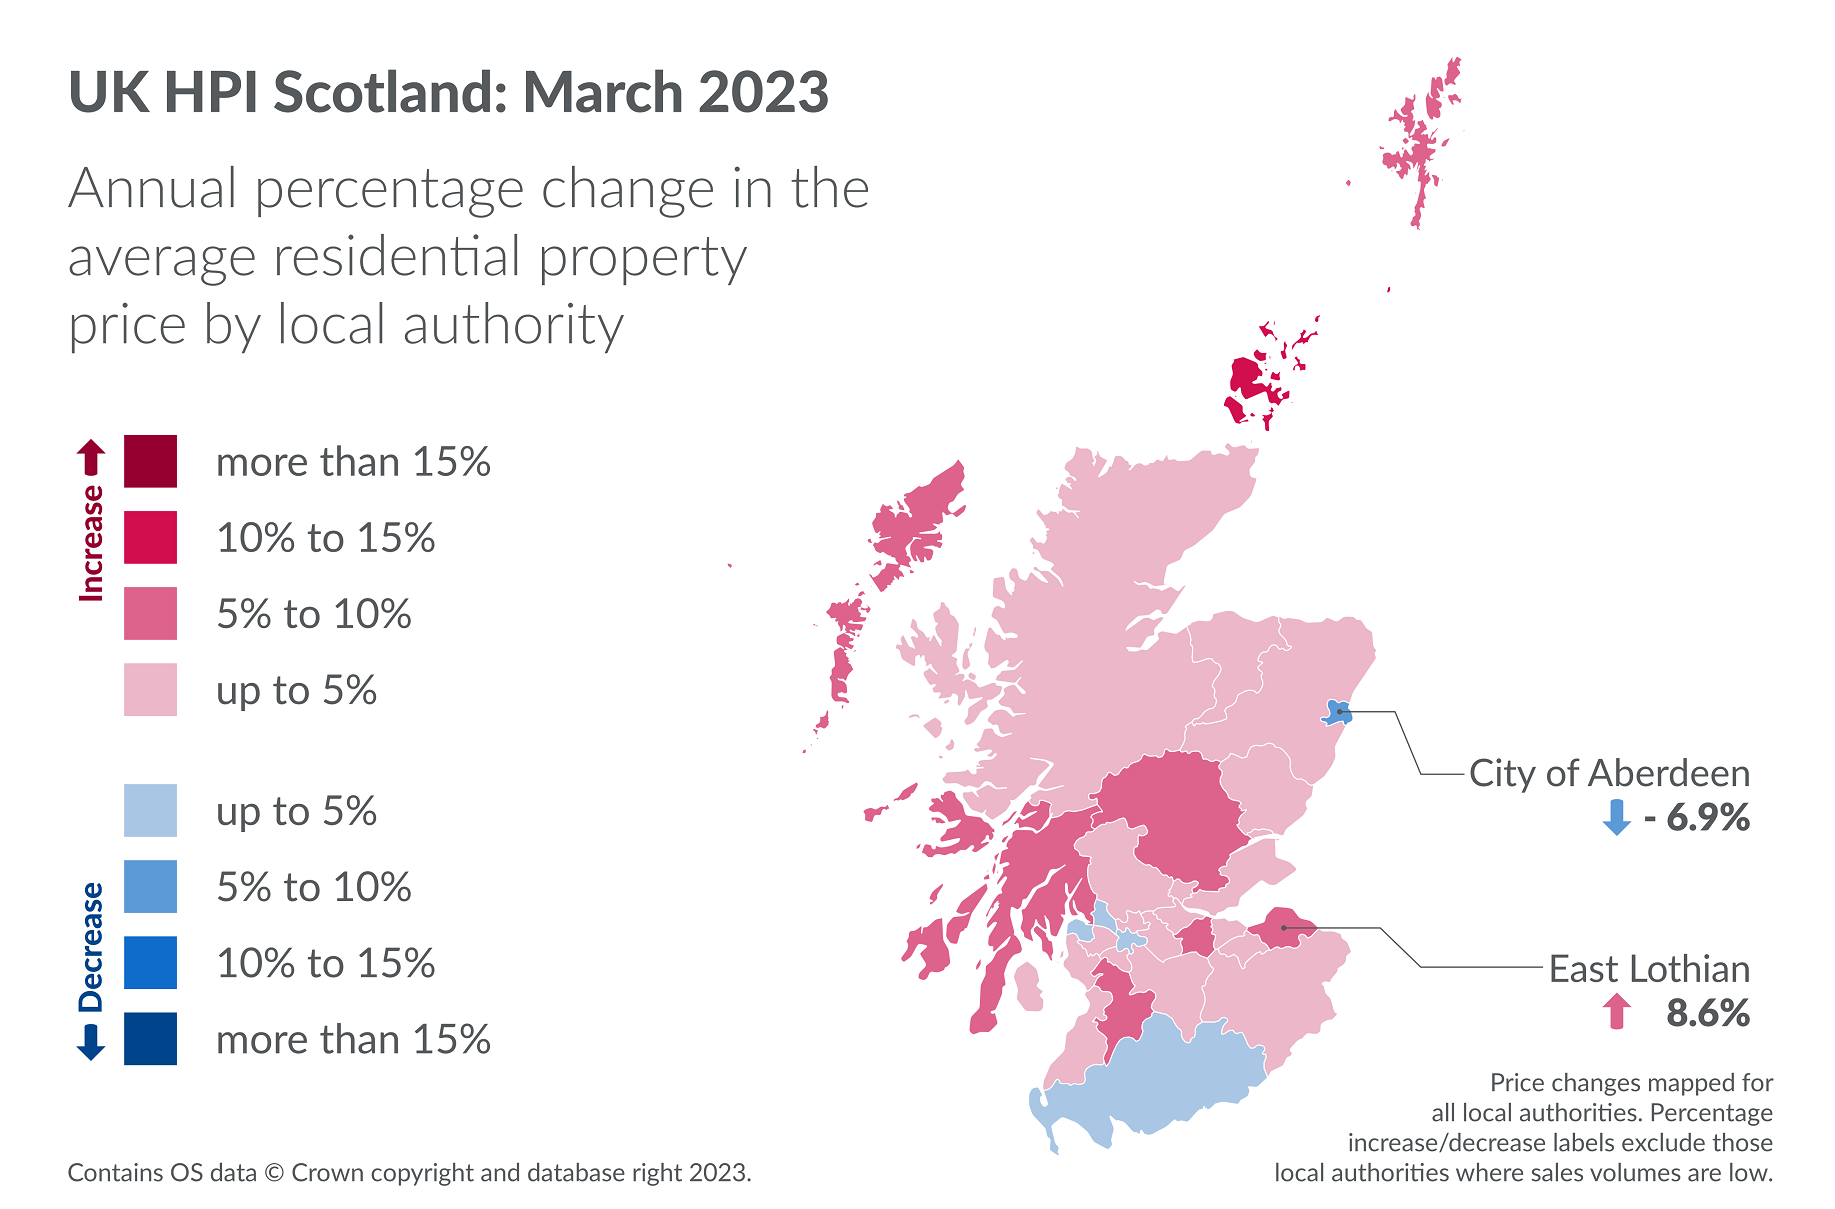 Residential property prices in Scotland show 3% annual increase